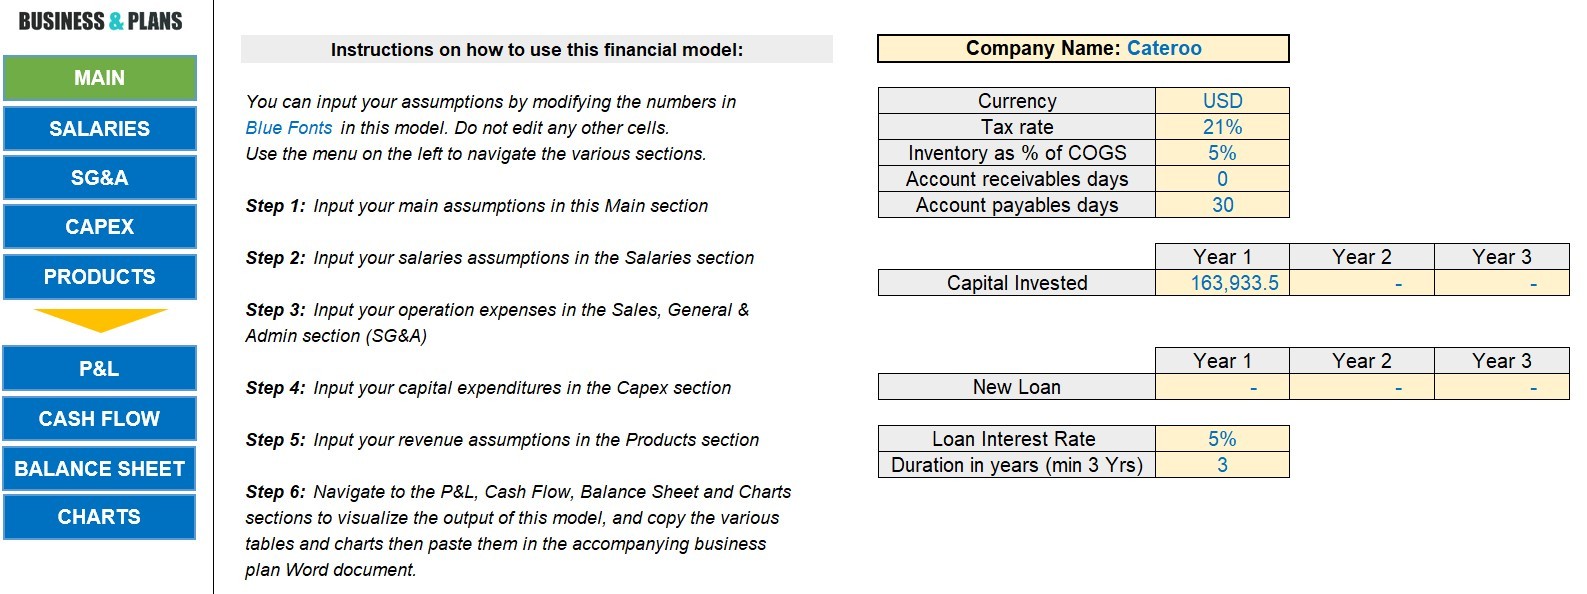 Catering financial plan template in Excel